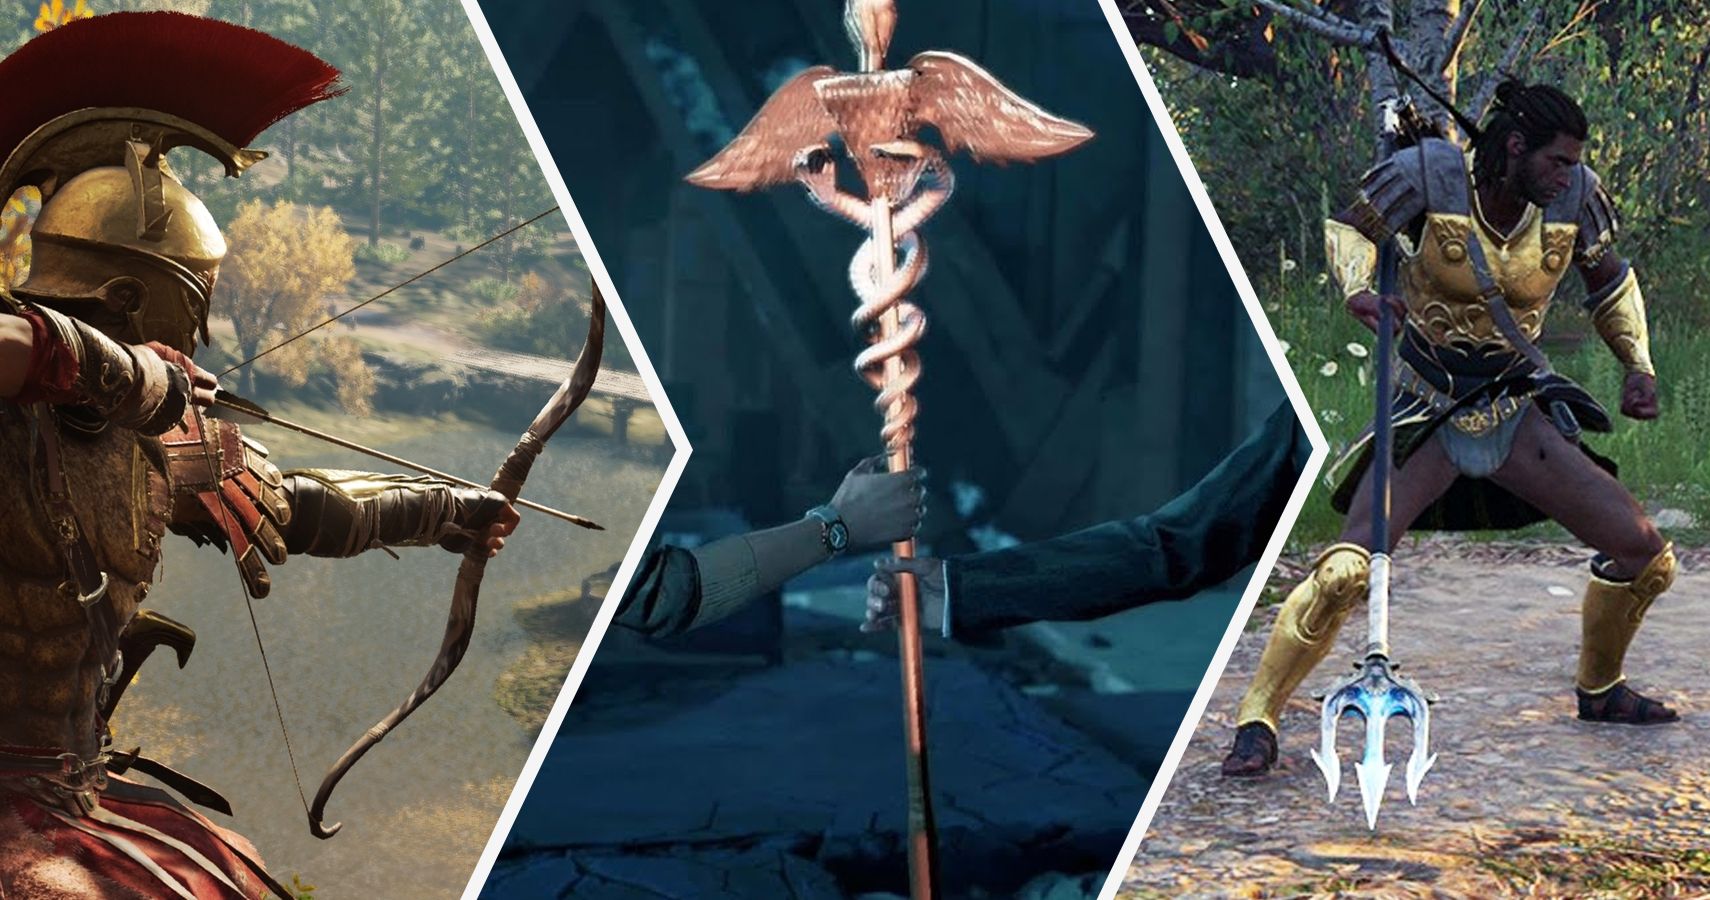 virtue Inaccessible Also Assassin's Creed: The 20 Most Powerful (And 7 Worthless) Weapons In Odyssey